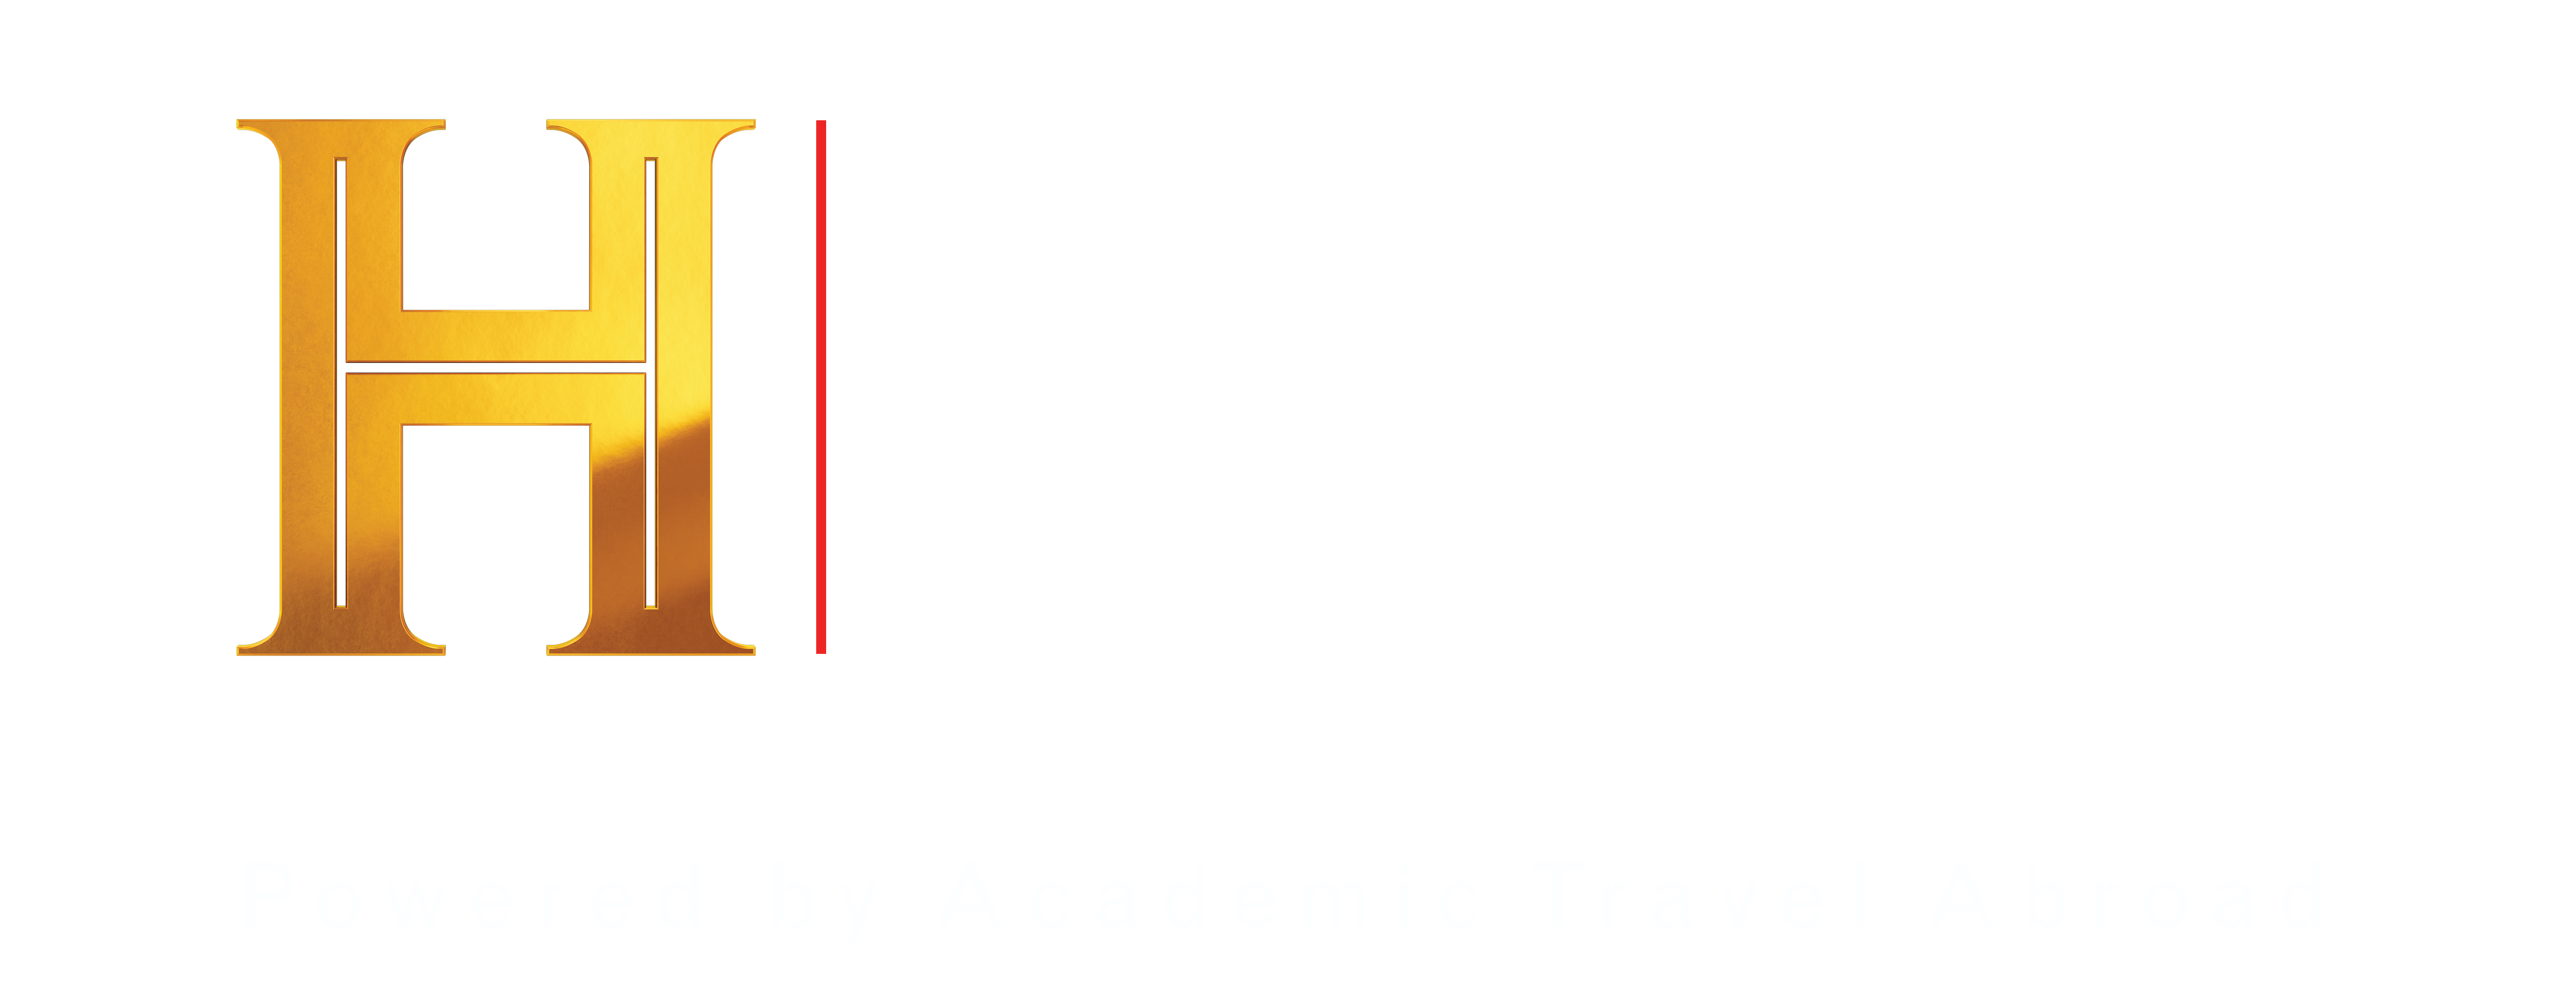 tour with history